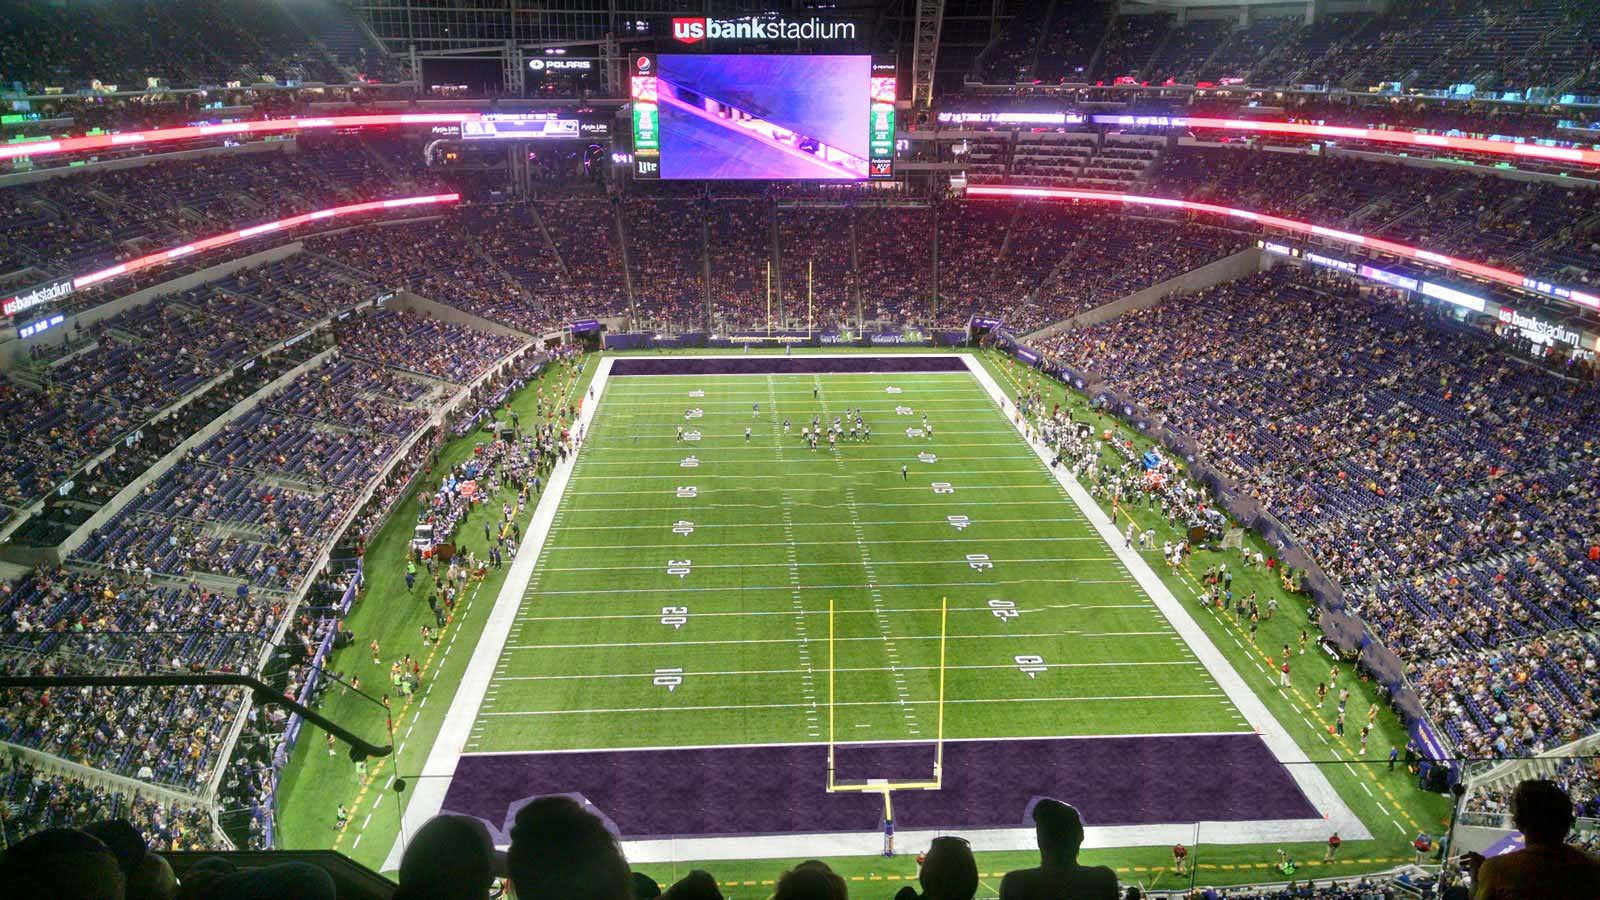 section 327, row 6 seat view  for football - u.s. bank stadium